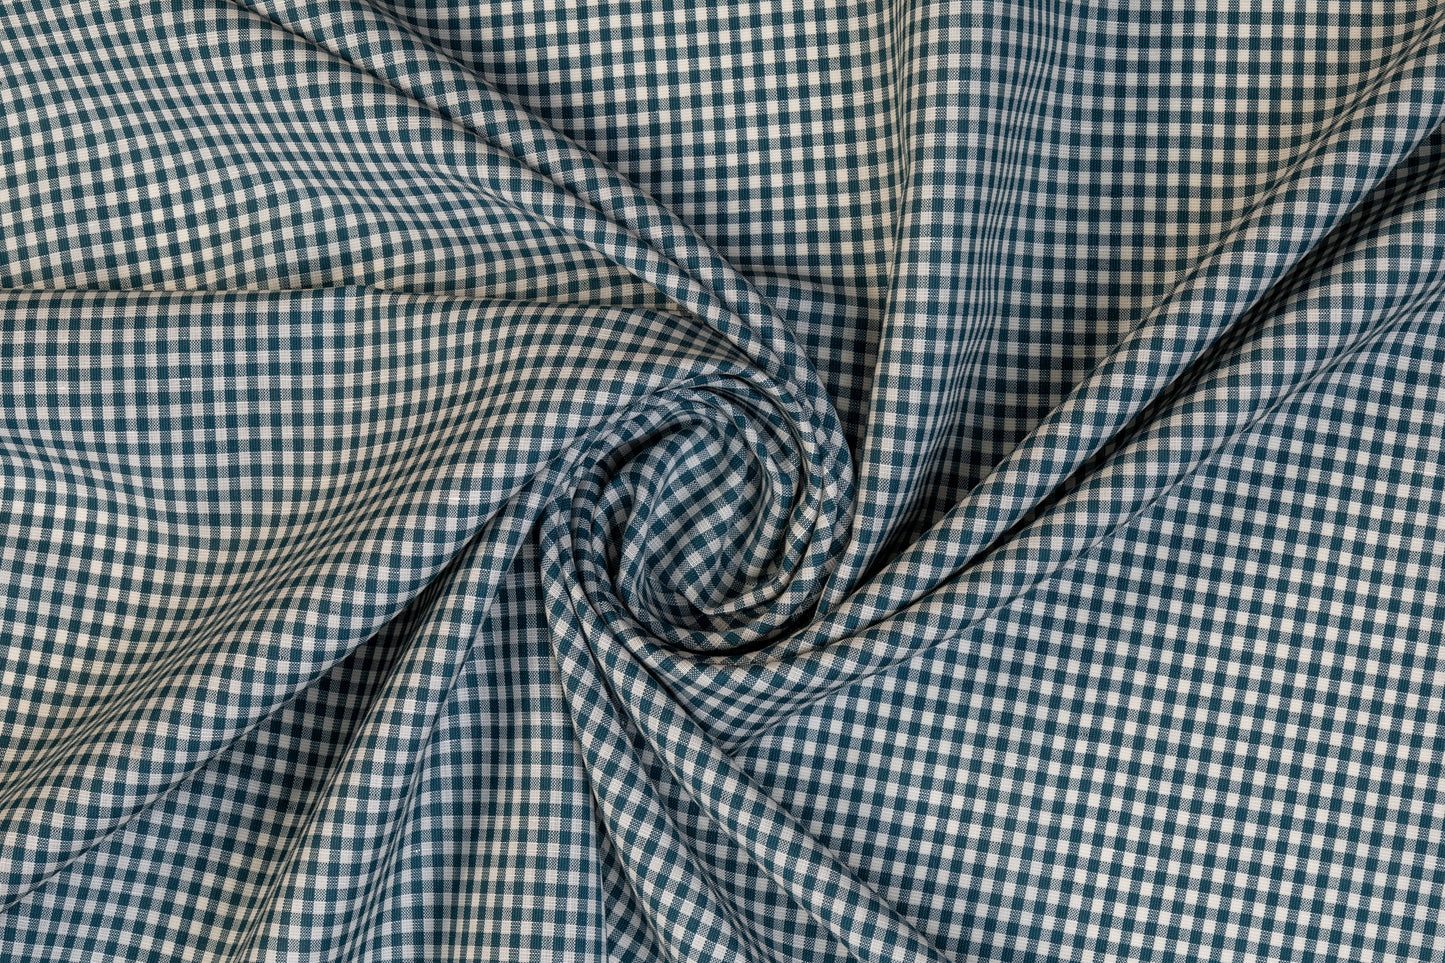 Gingham Check Italian Wool Linen Suiting - Teal and White